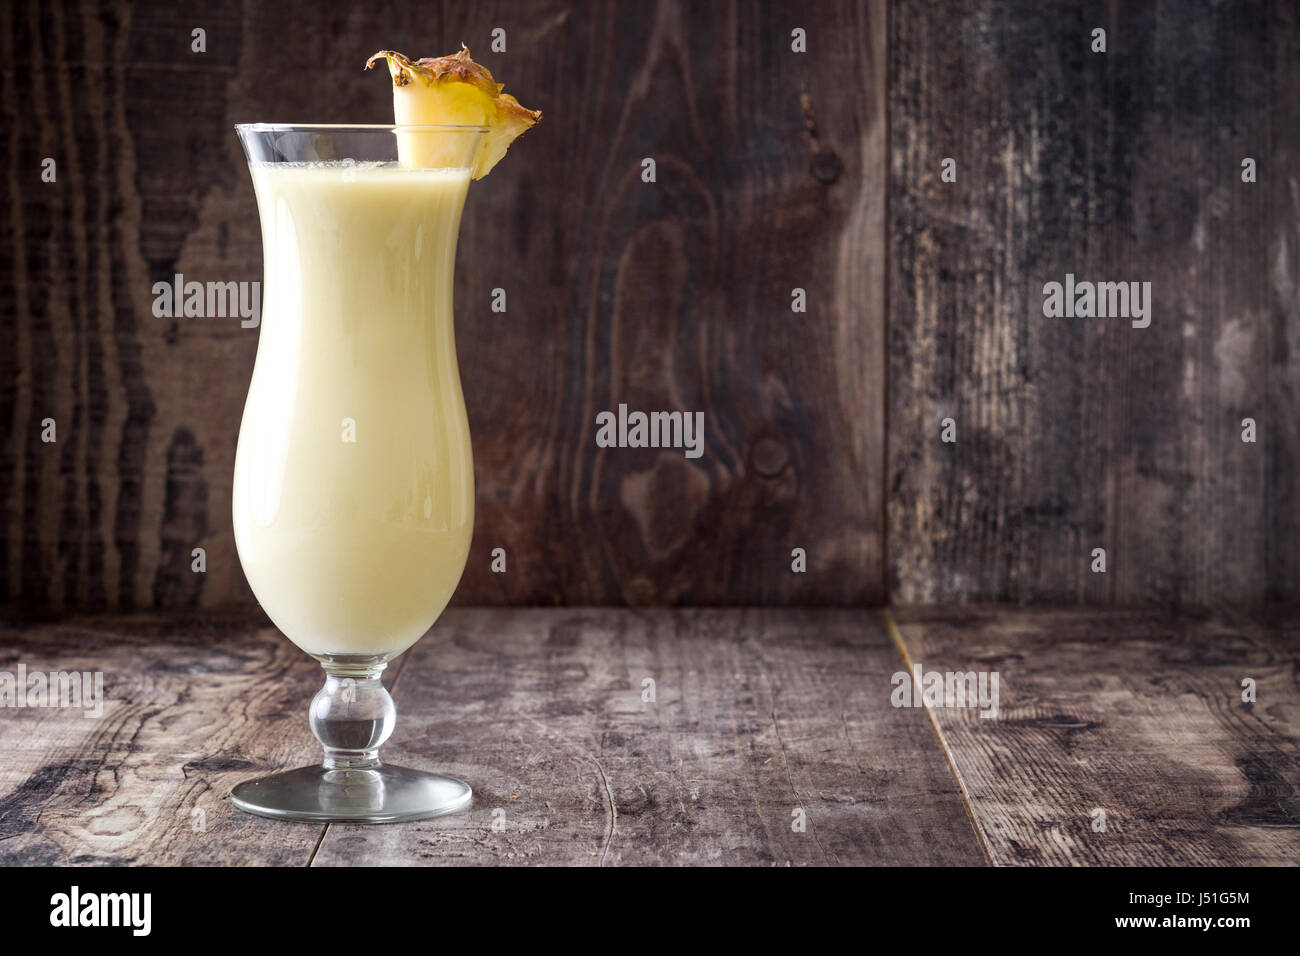 Pina colada cocktail on wooden background Stock Photo